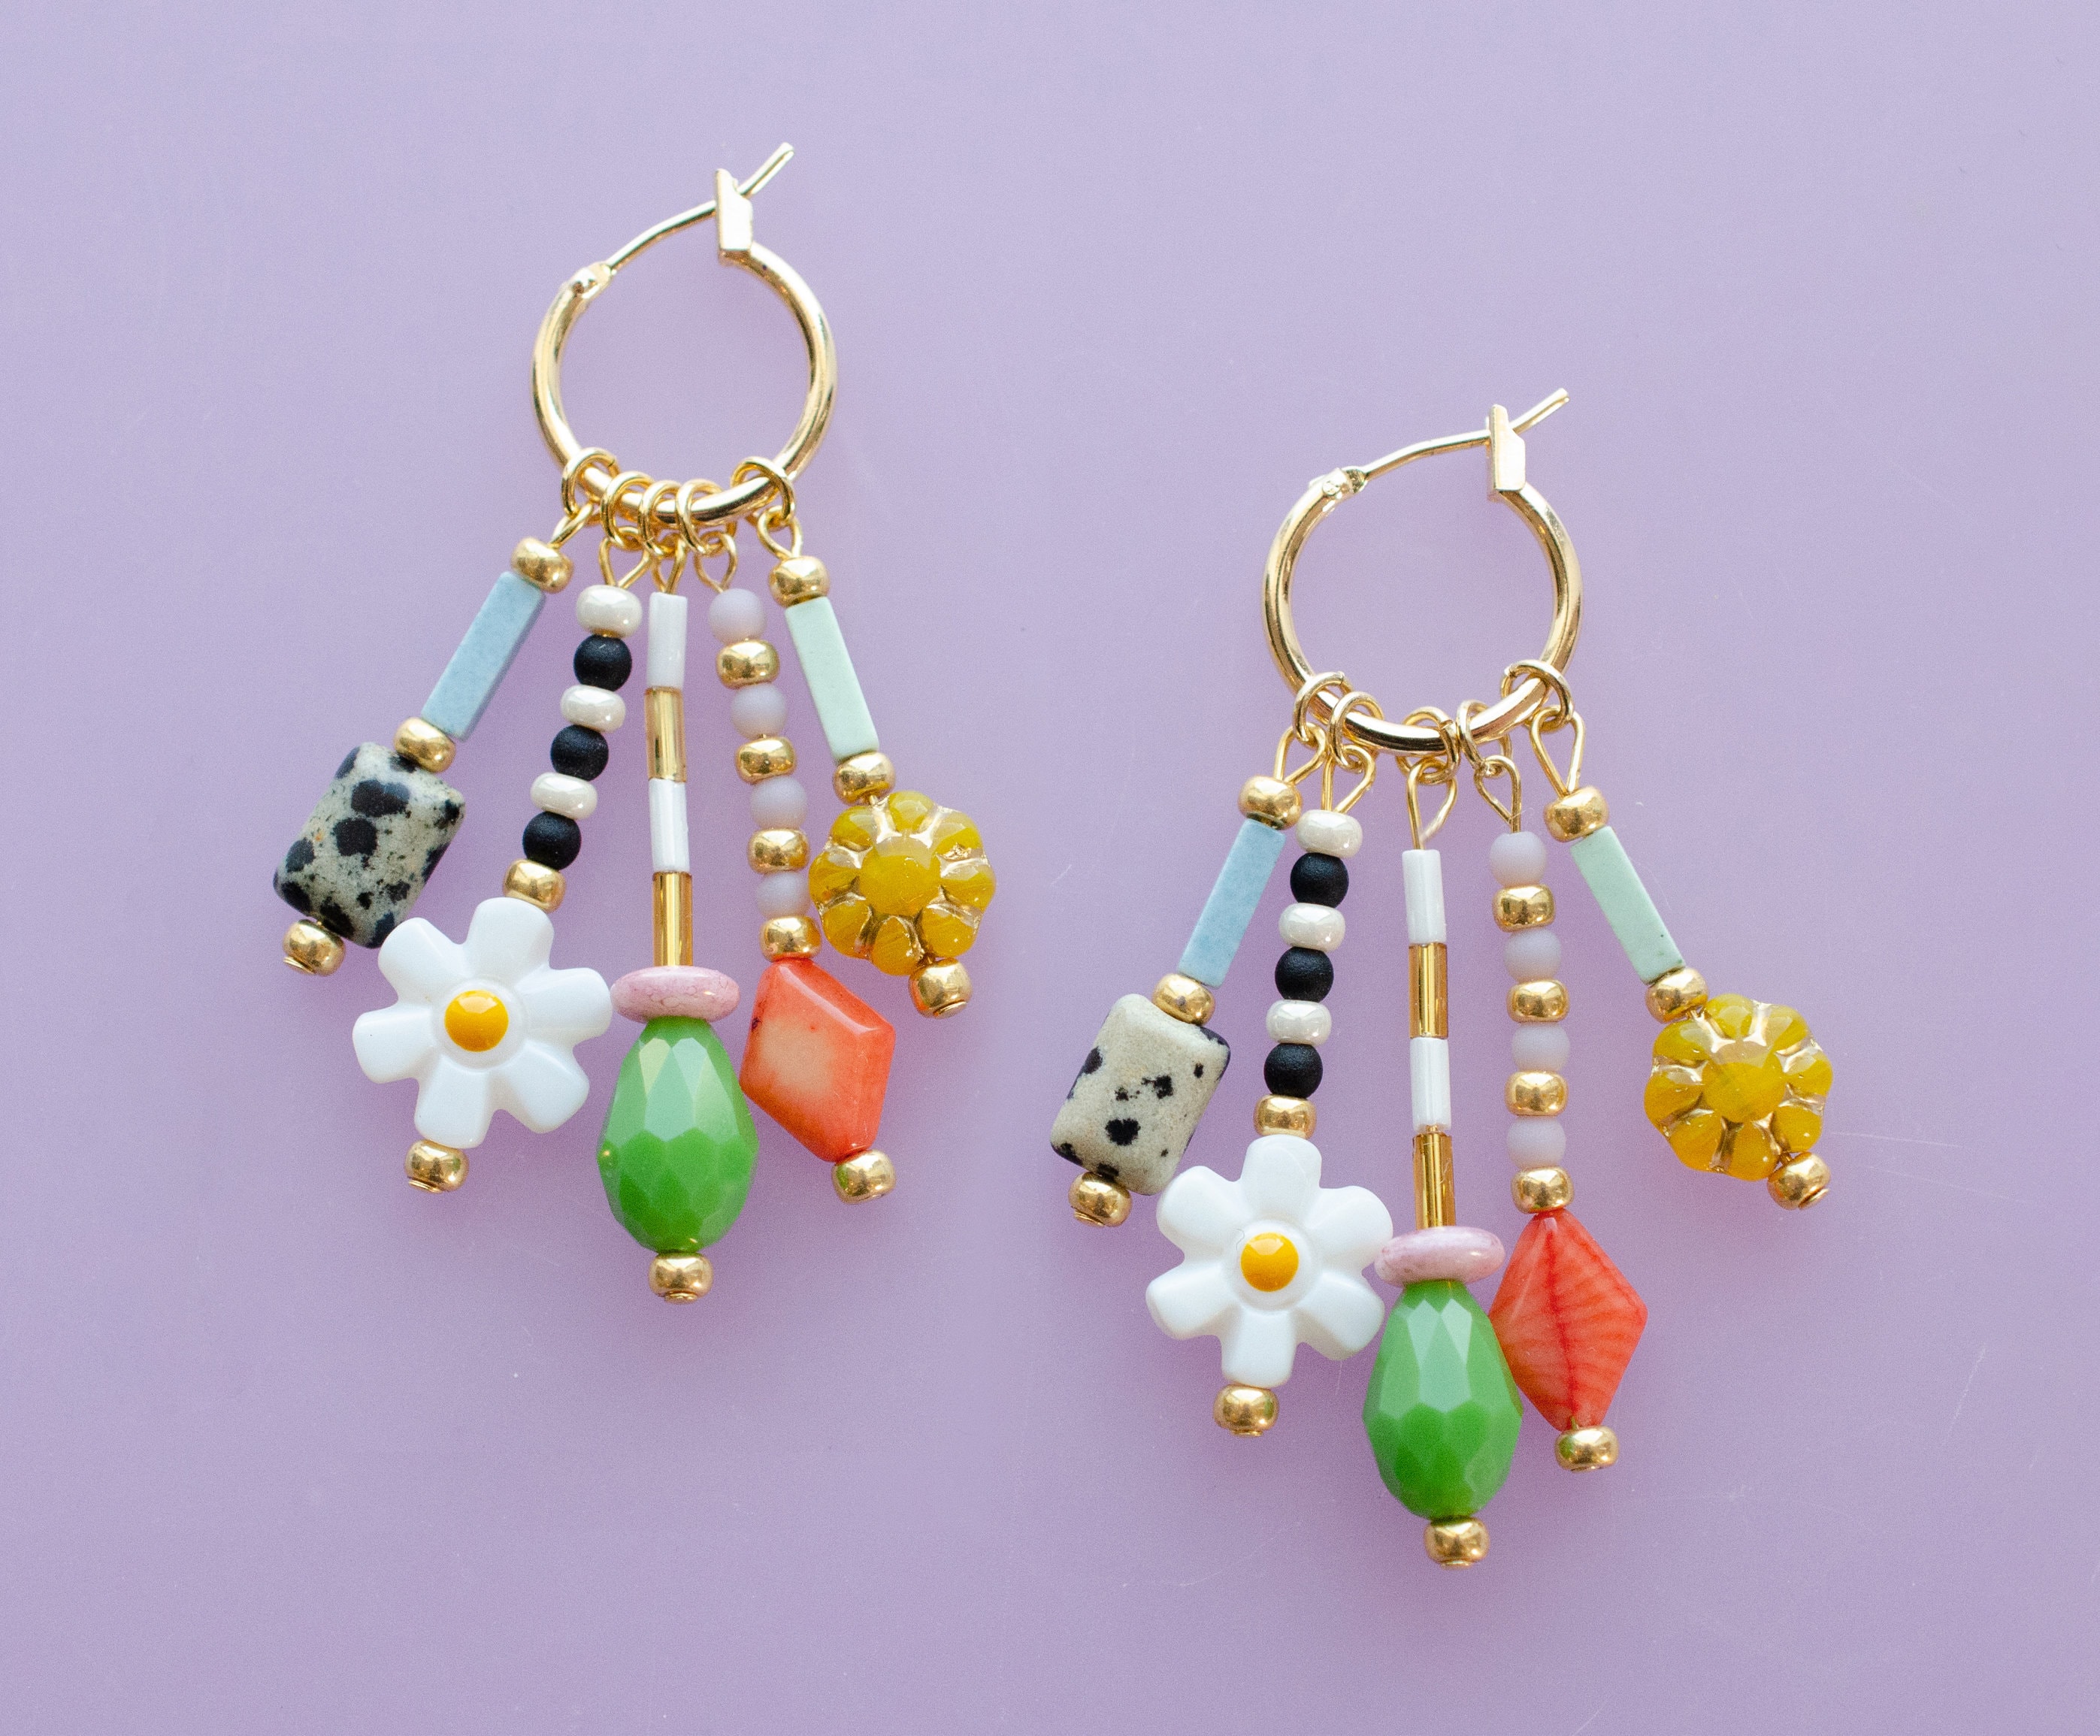 LALAFINA 60pcs Beaded Earrings Jewelry Charms Earring Charms Pompoms Charms  for Keychains Pendants for Jewelry Making Charms for Earring Making Fluffy